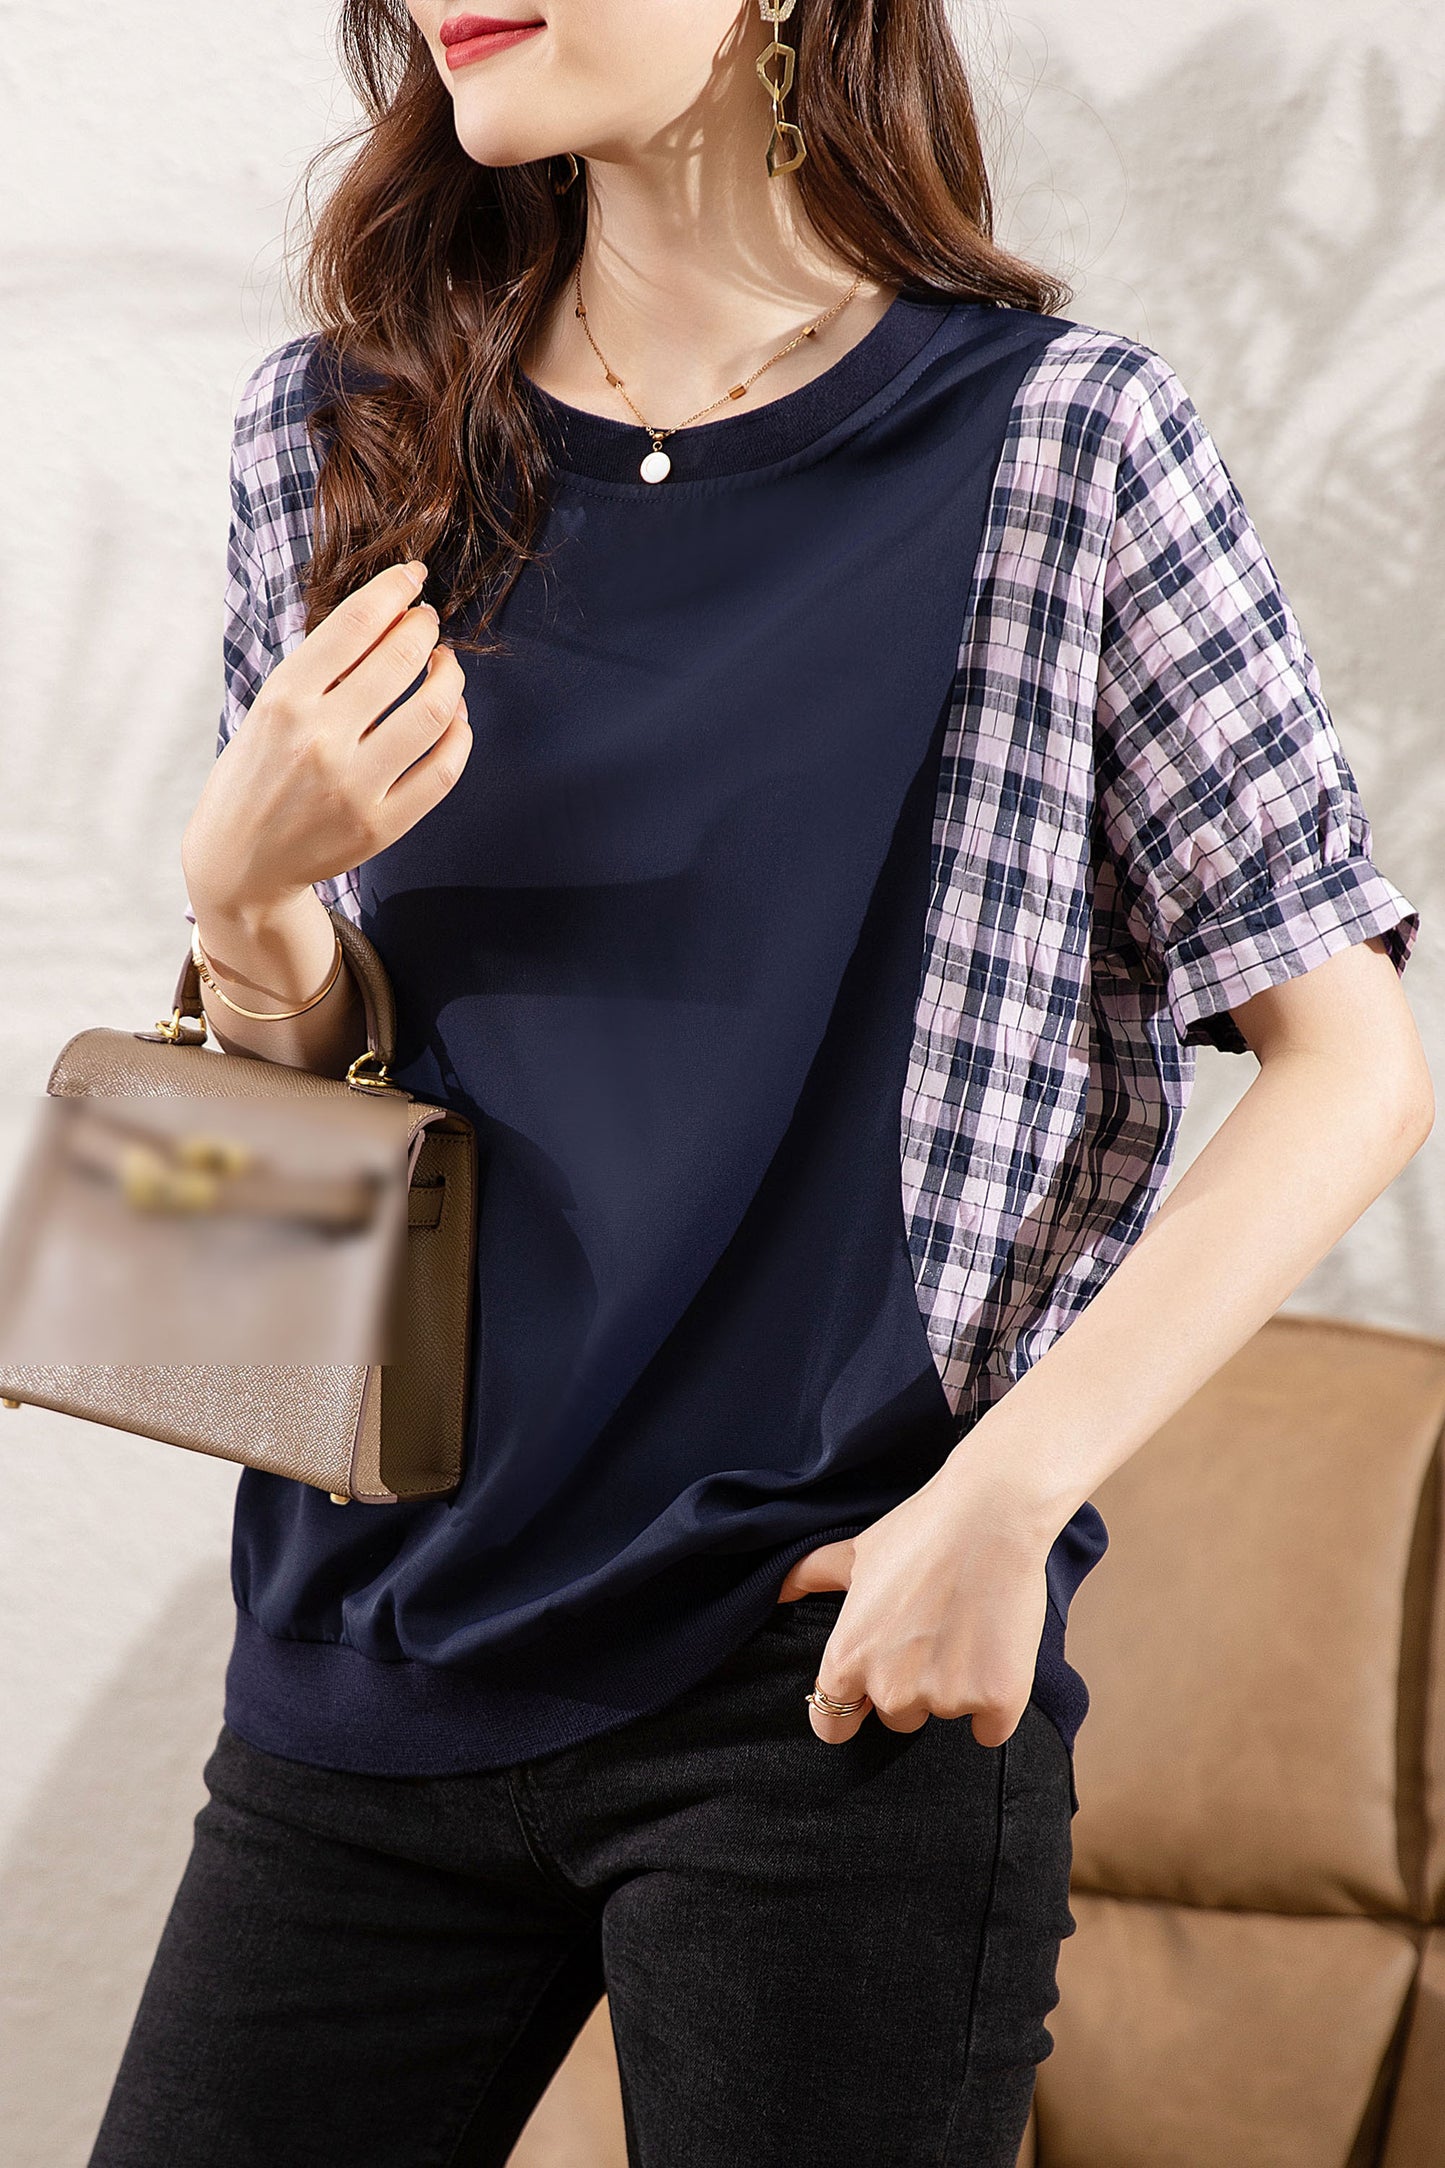 Casual Patchwork Shirt Tops